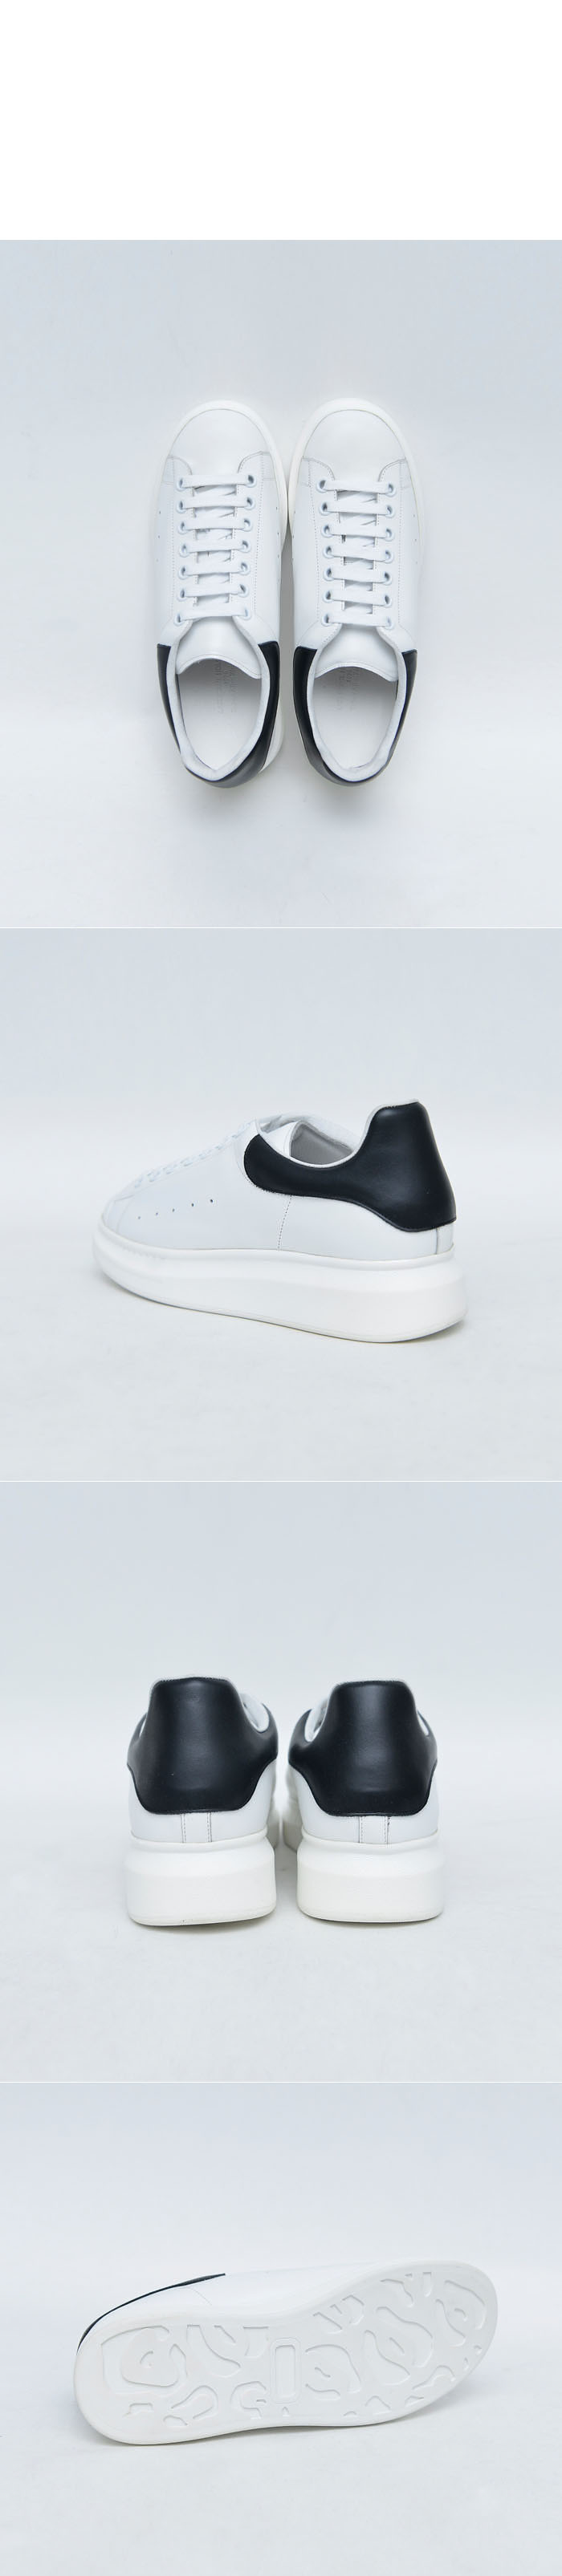 Shoes :: Sneakers :: Classy Designer Leather Sneakers-Shoes 836